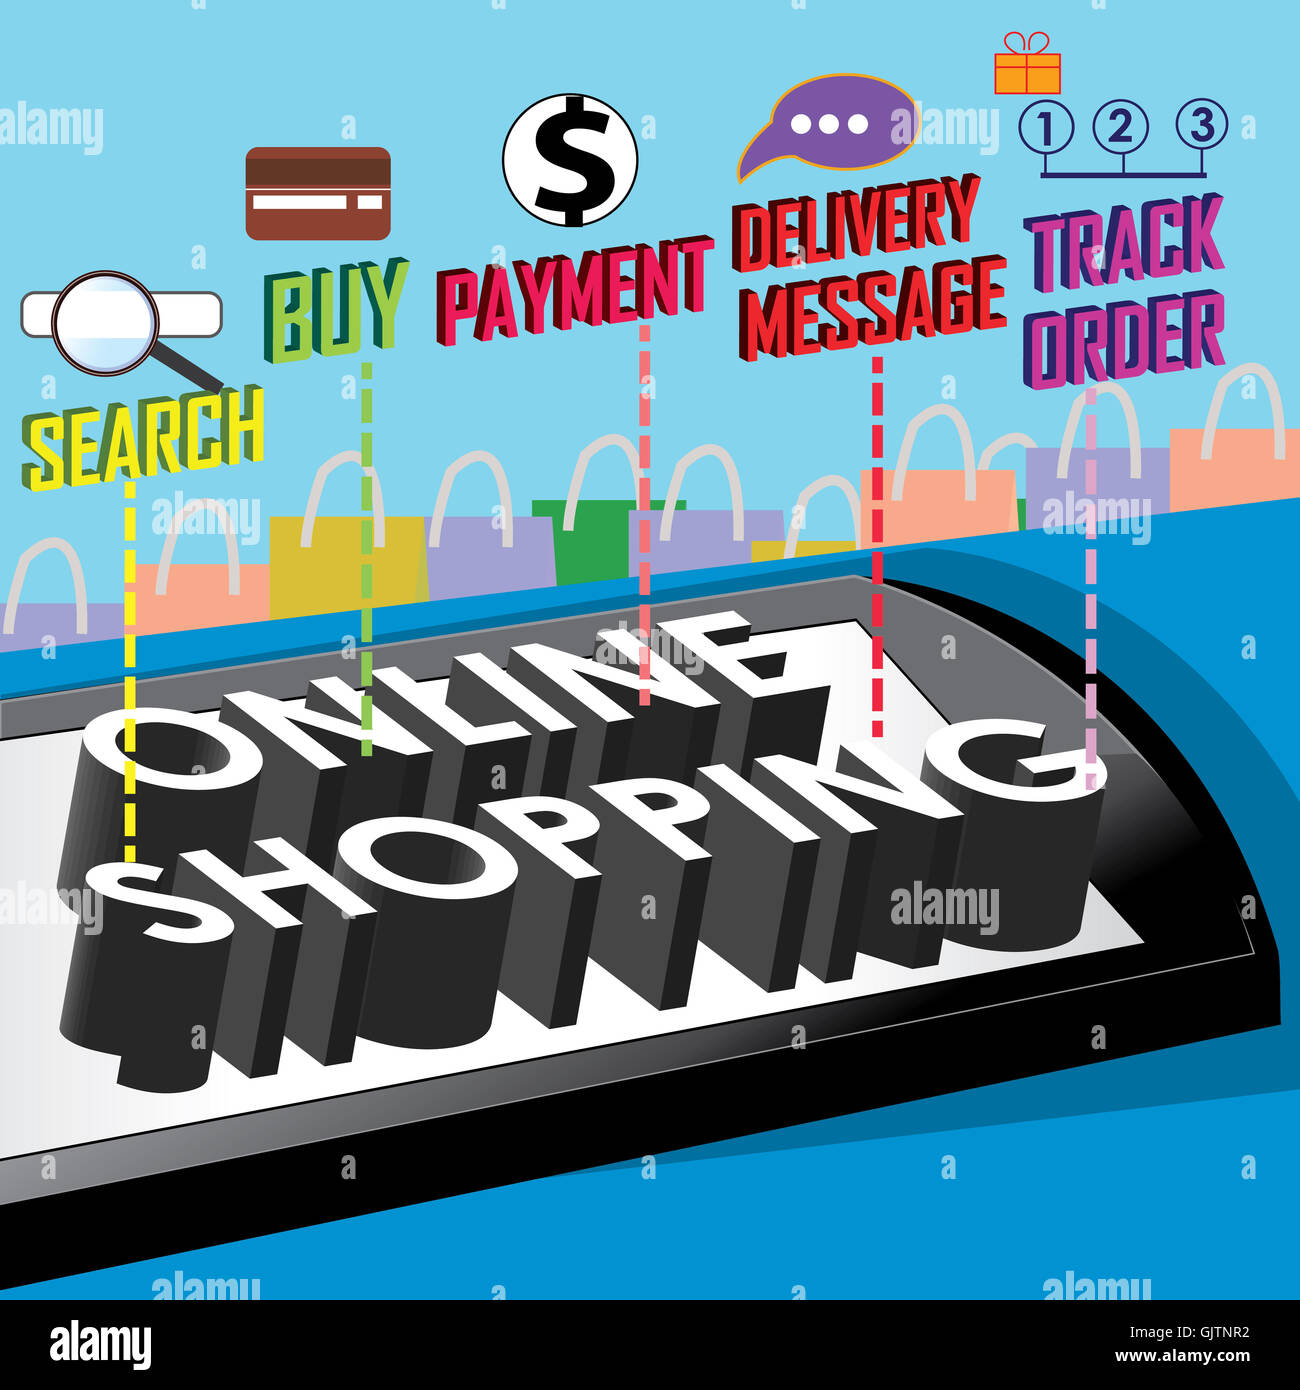 The process included in online shopping is presented in the form of a illustration. Stock Photo